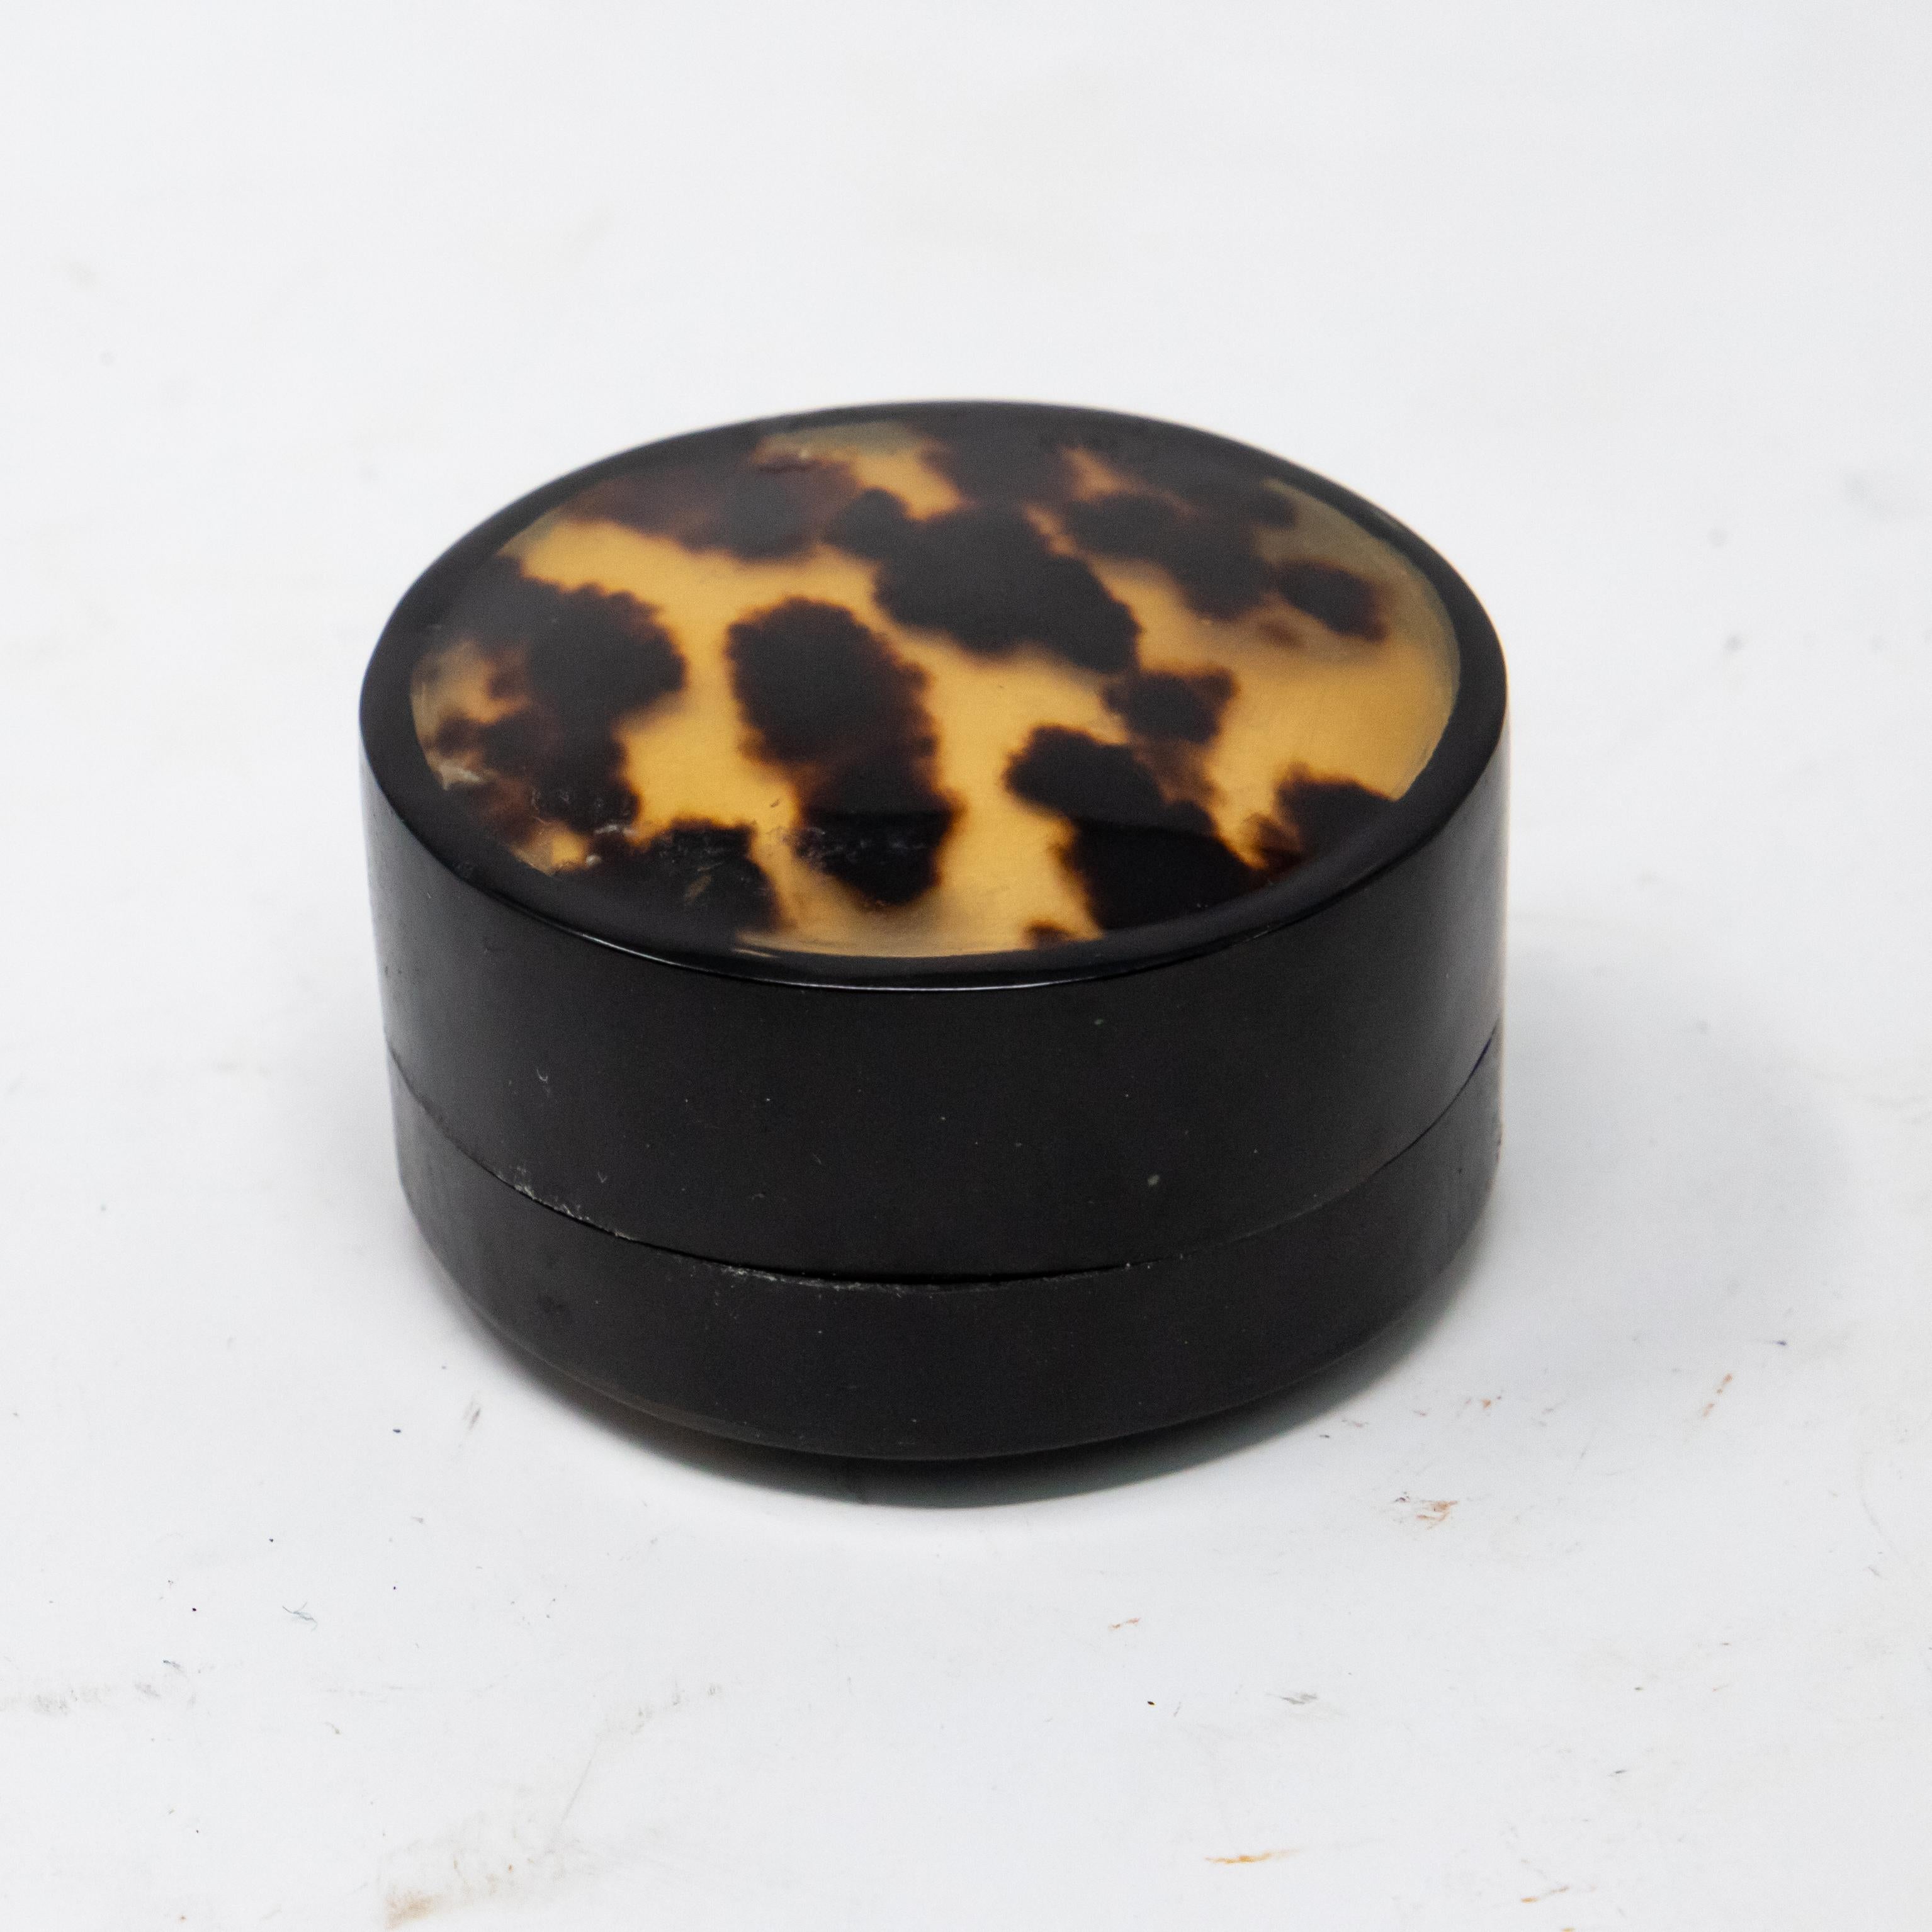 Lacquered sides with leopard print painting on an amber surface on the top. Small pill/trinket box.